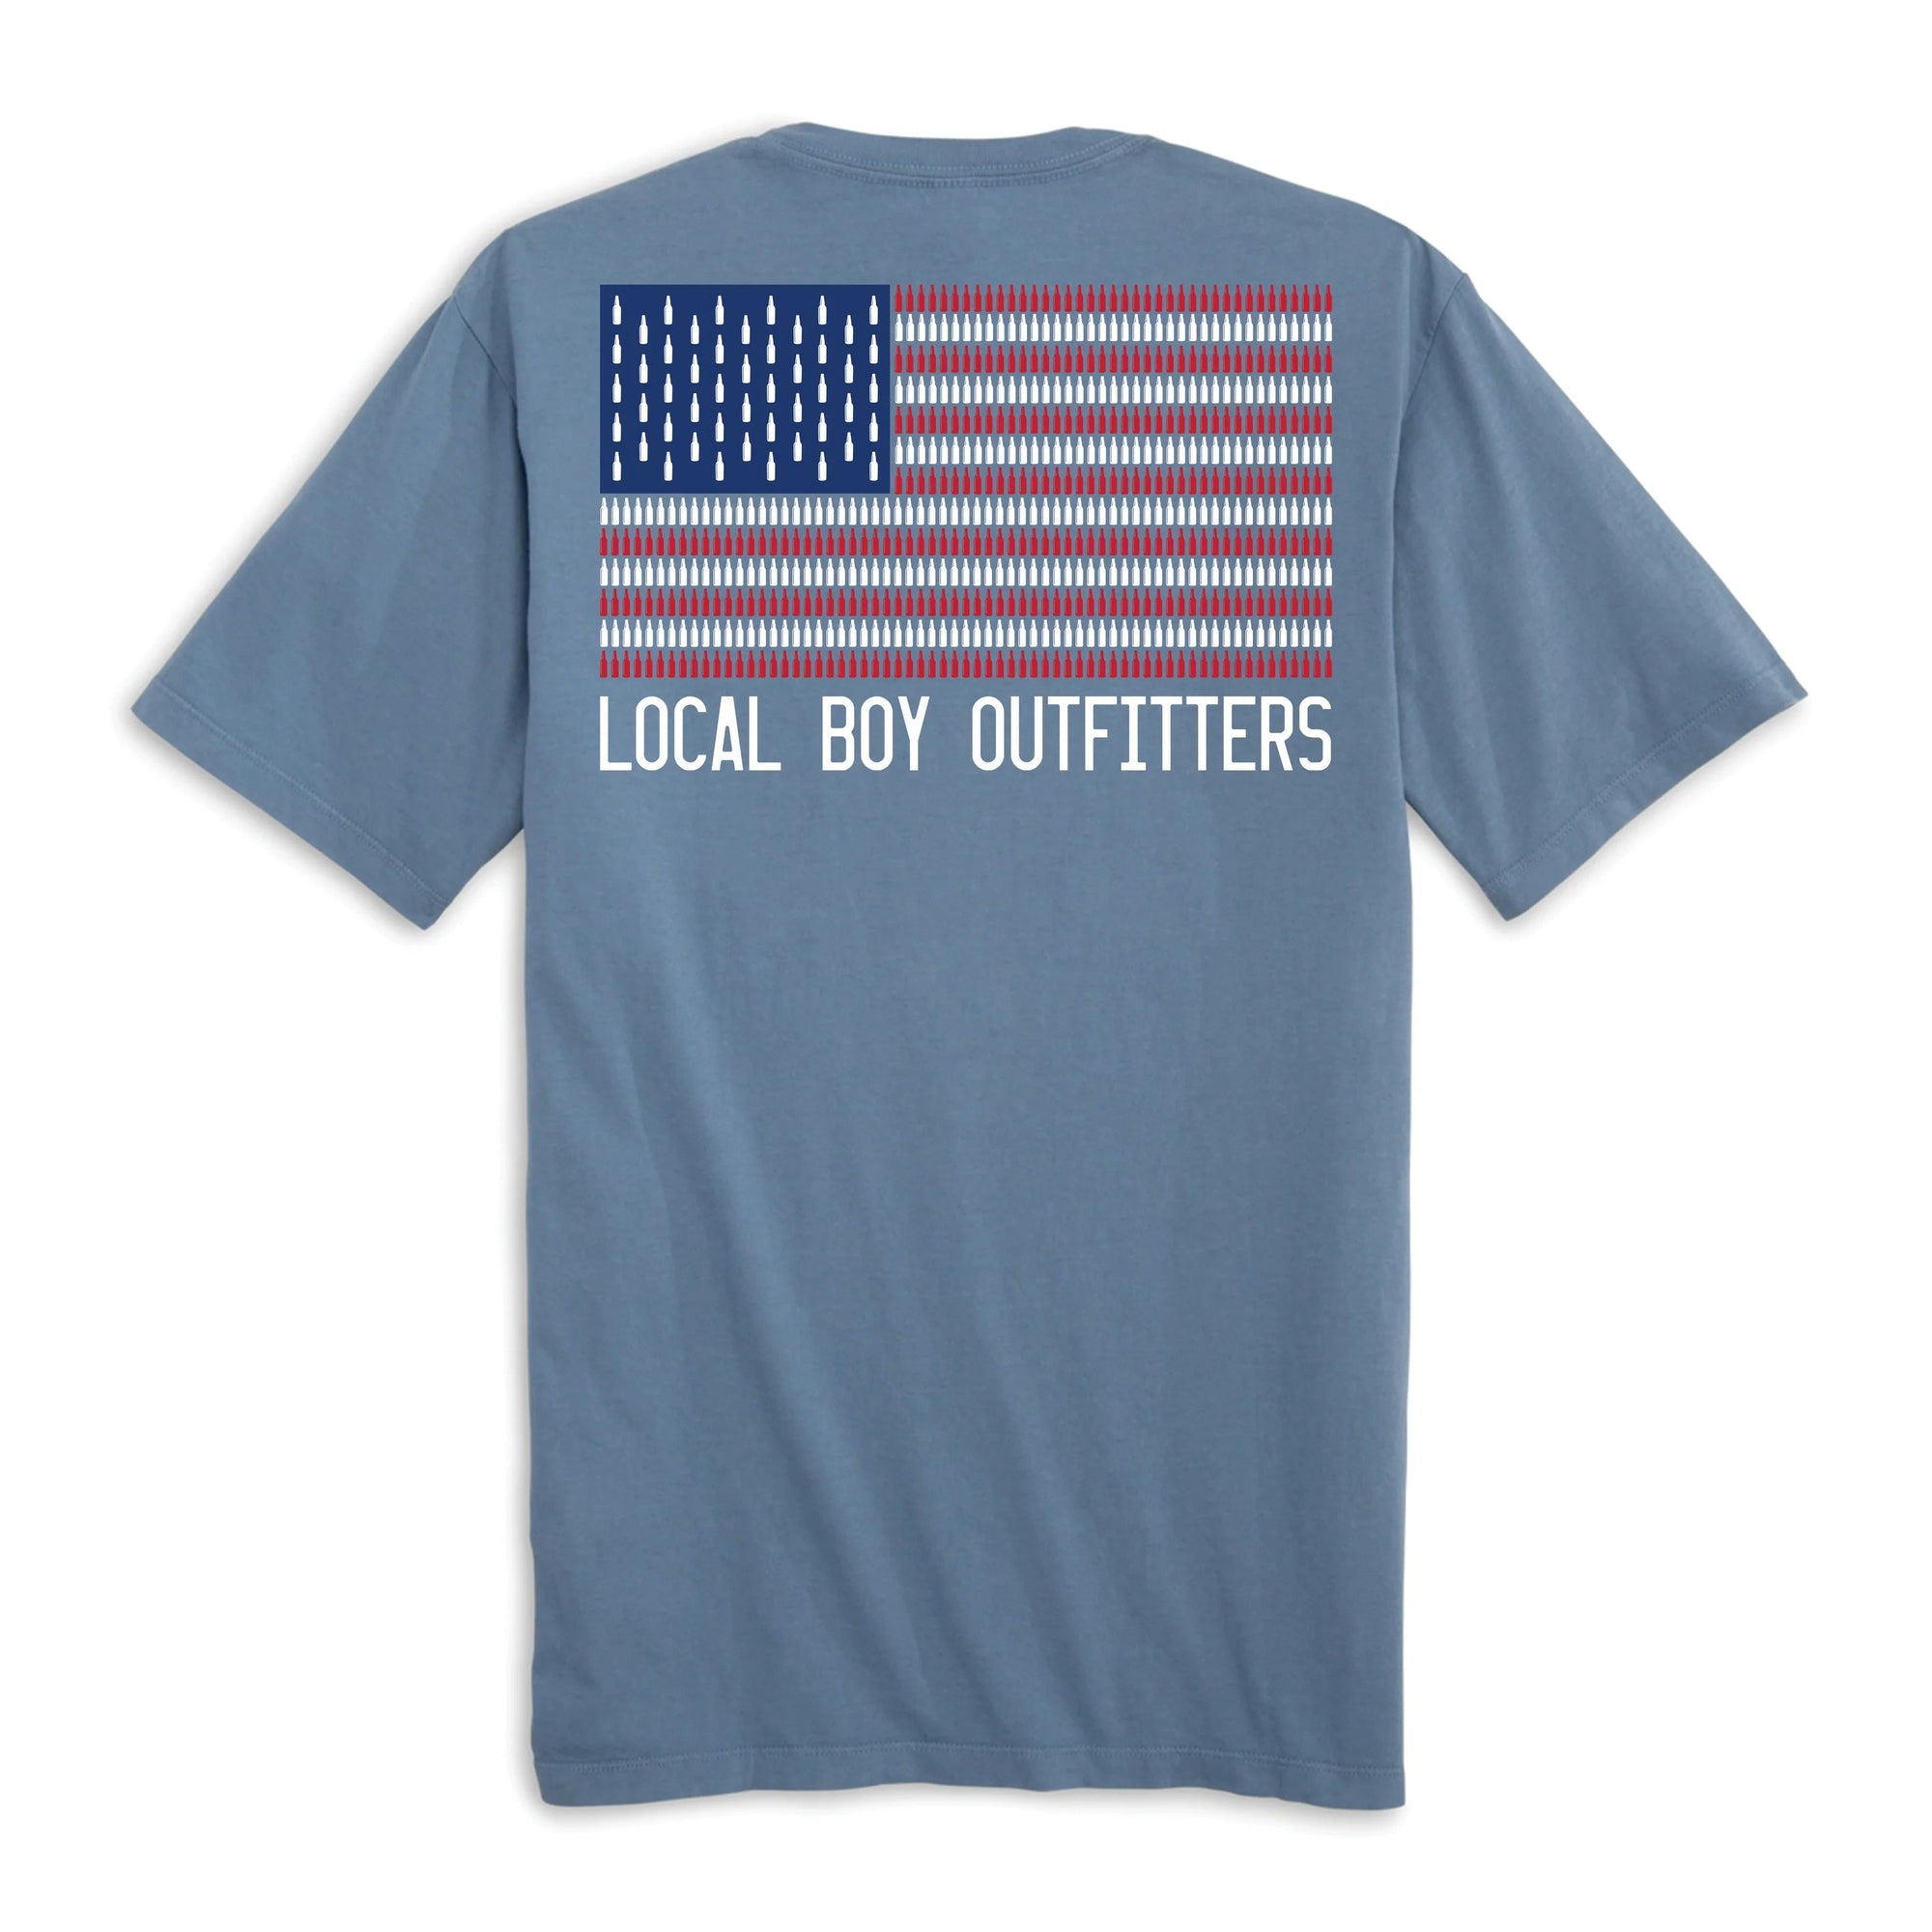 LOCAL BOY OUTFITTERS Men's Tees Local Boy Bottle Flag T-Shirt || David's Clothing